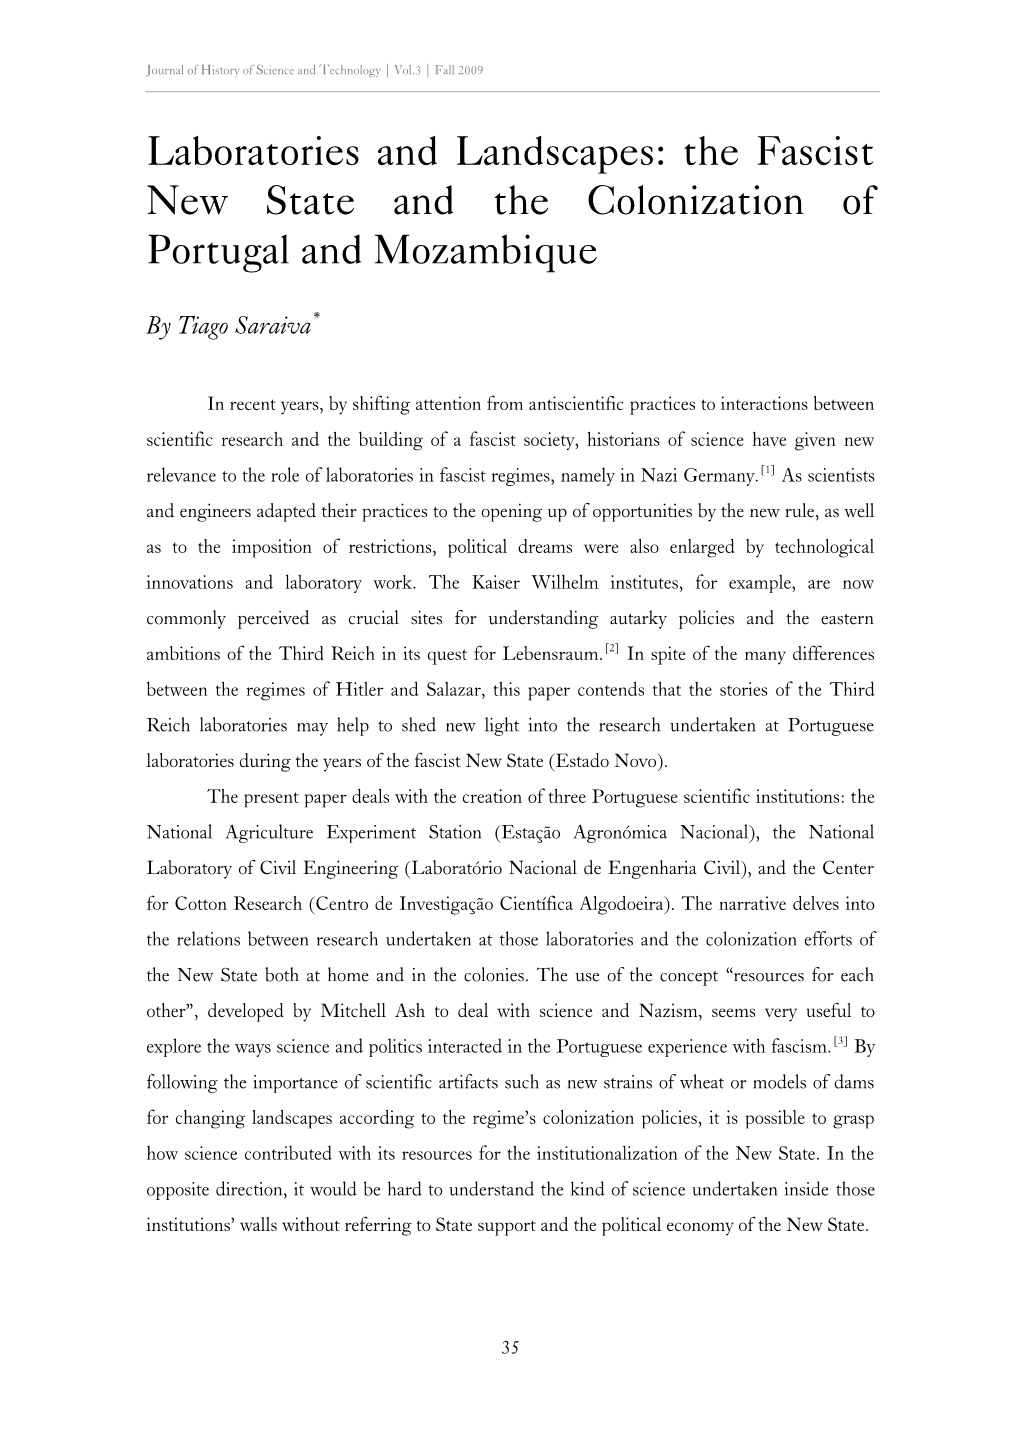 Laboratories and Landscapes: the Fascist New State and the Colonization of Portugal and Mozambique